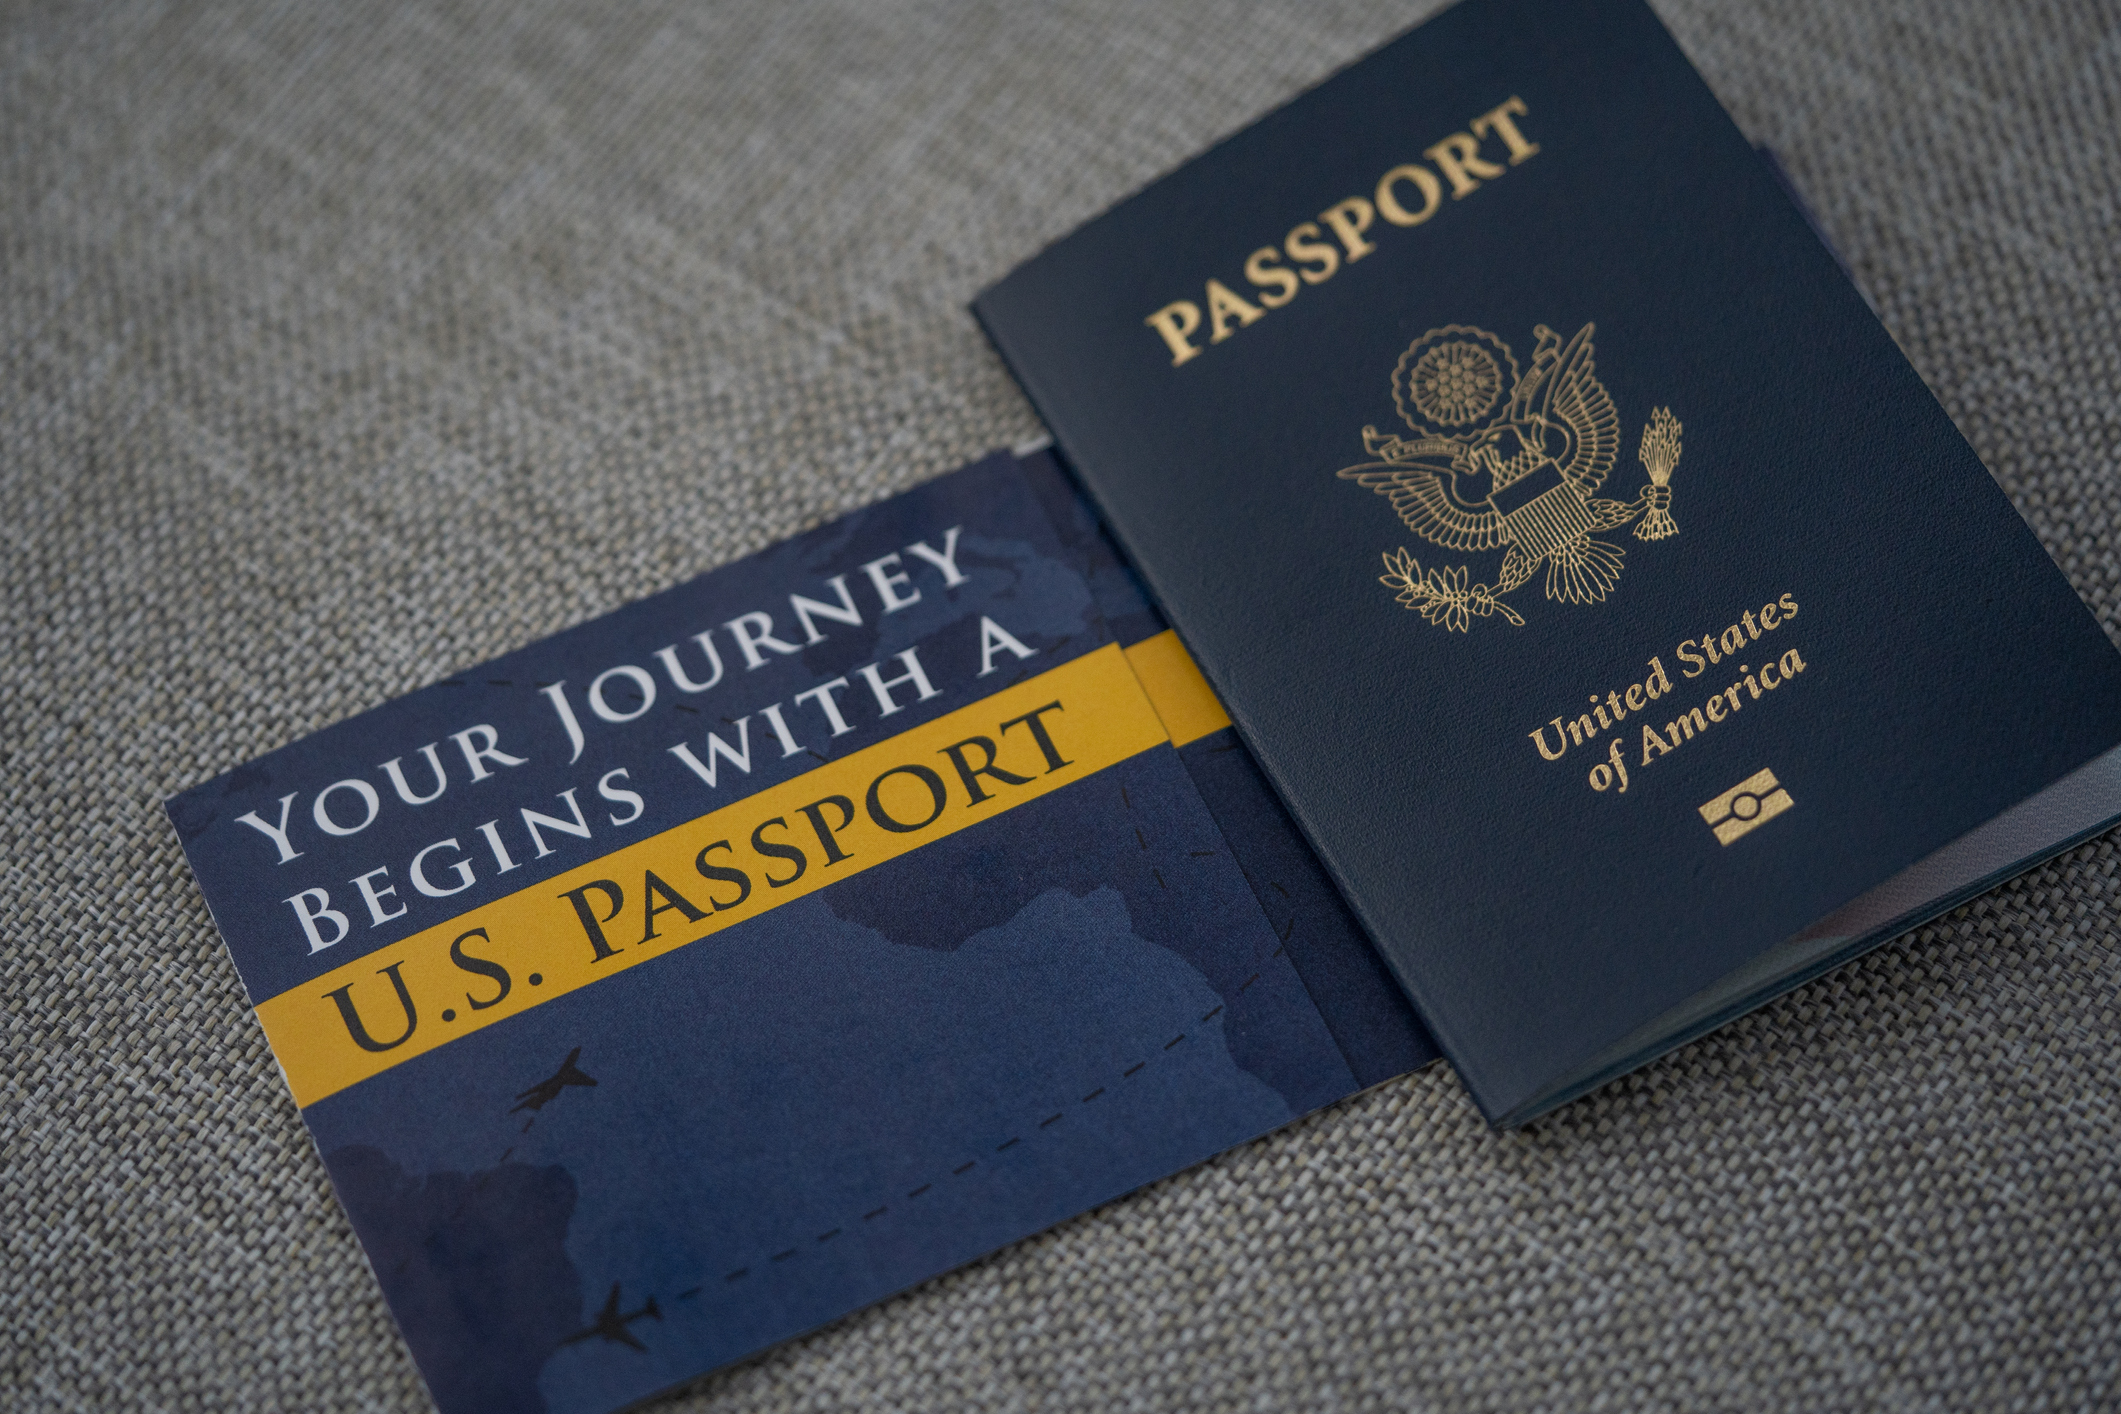 Passports from your home country are necessary documents for international travel (photo from iStock)